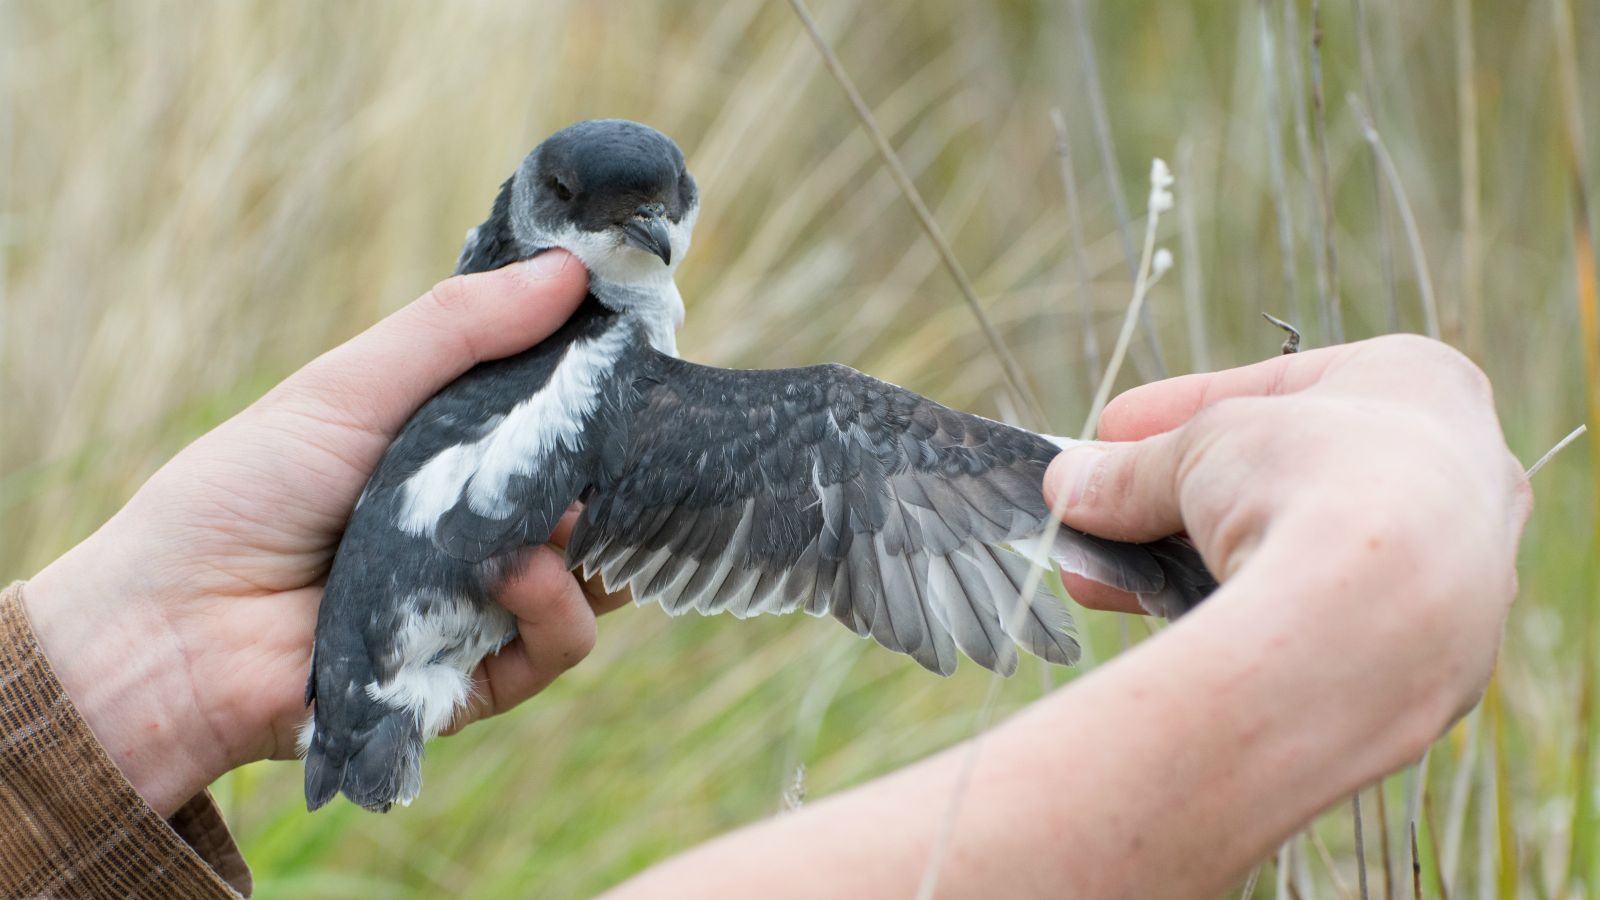 A Whenua Hou diving petrel is held up by a pair of hands with one wing extended